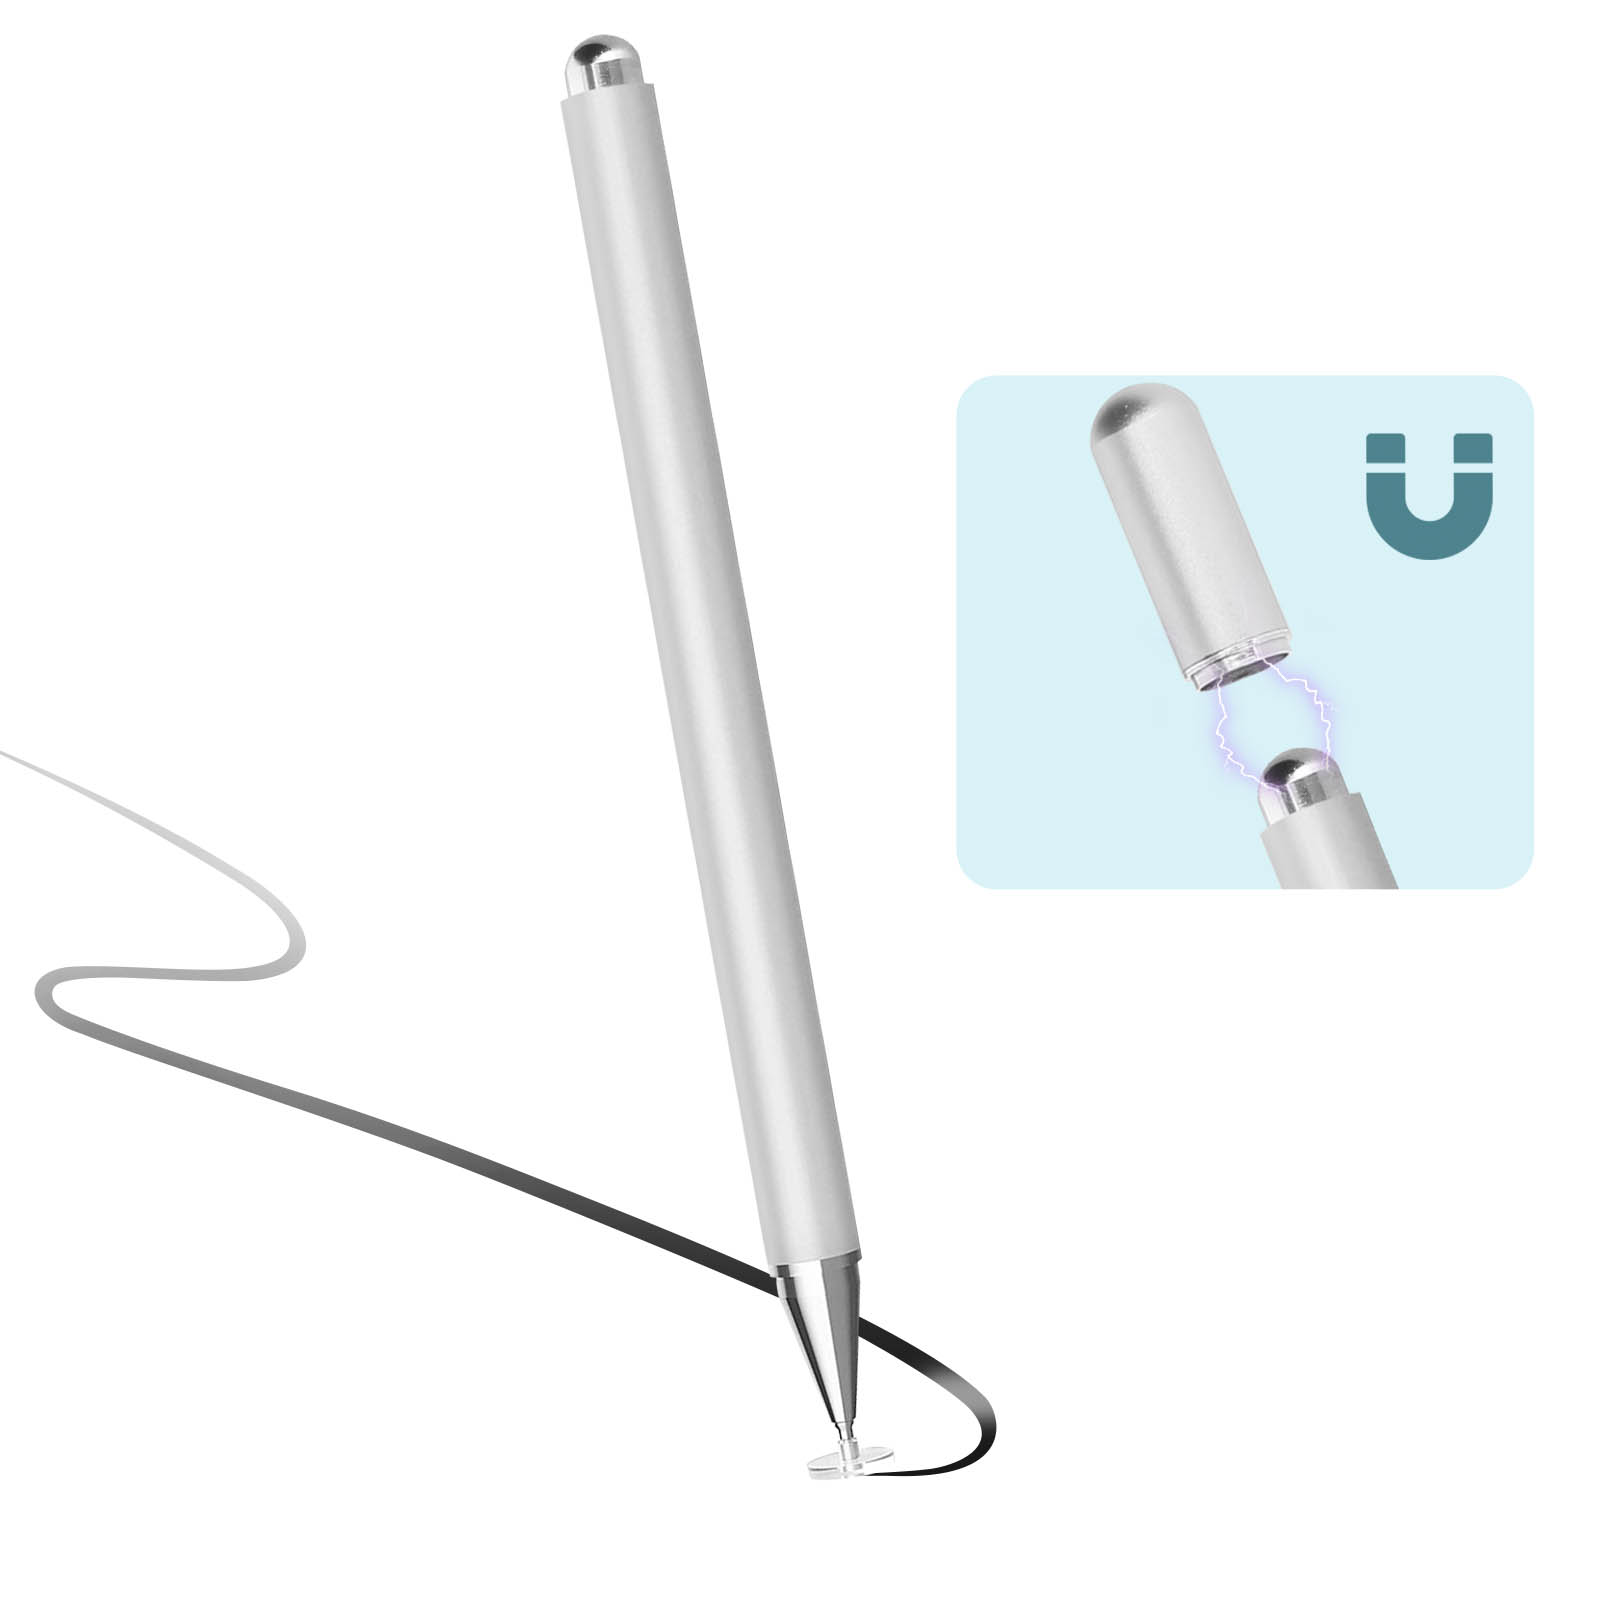 Stylets pour tablette OZZZO stylet + stylo tactile chic blanc pour